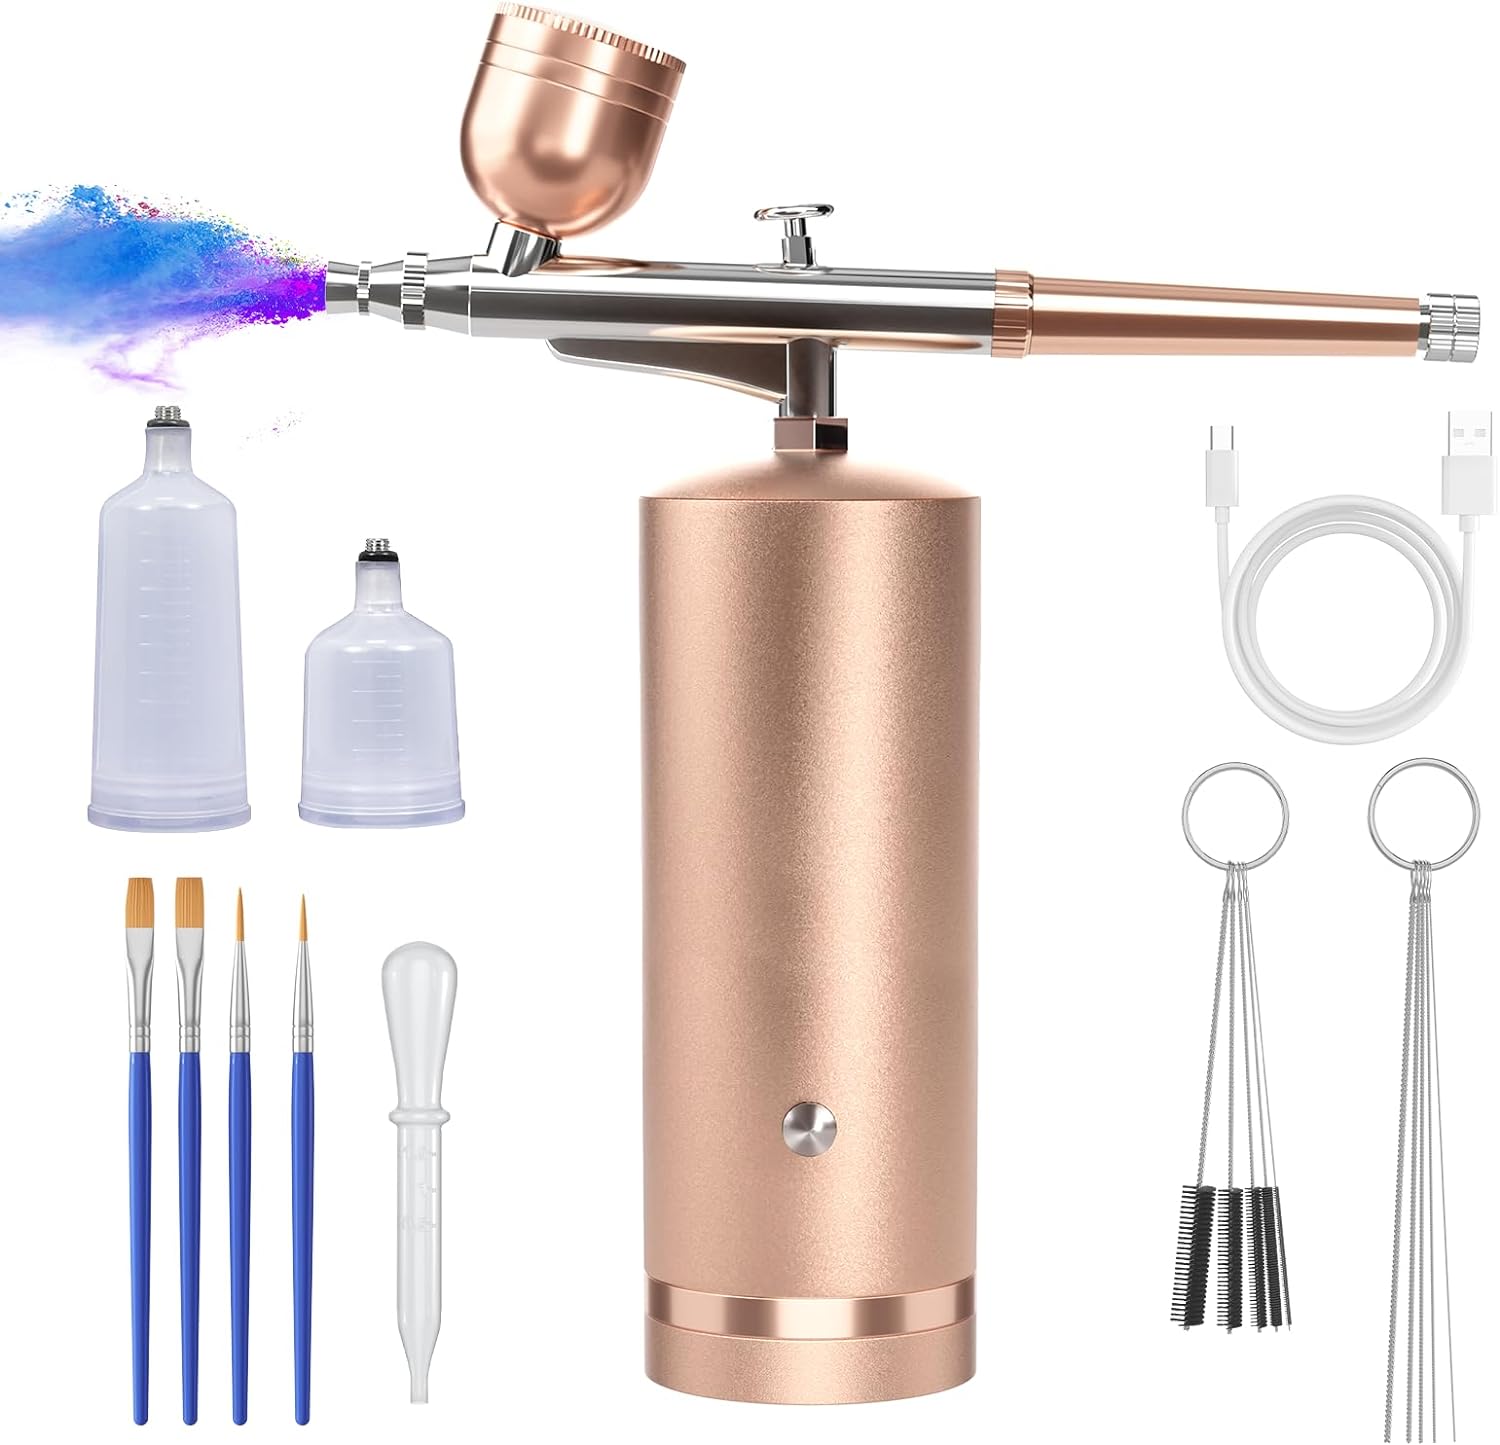 Airbrush Rechargeable Cordless Airbrush-Kit Compressor - 30Psi High  Pressure Airbrush Gun with Hose Wireless Air Brush for  Painting,Makeup,Barber